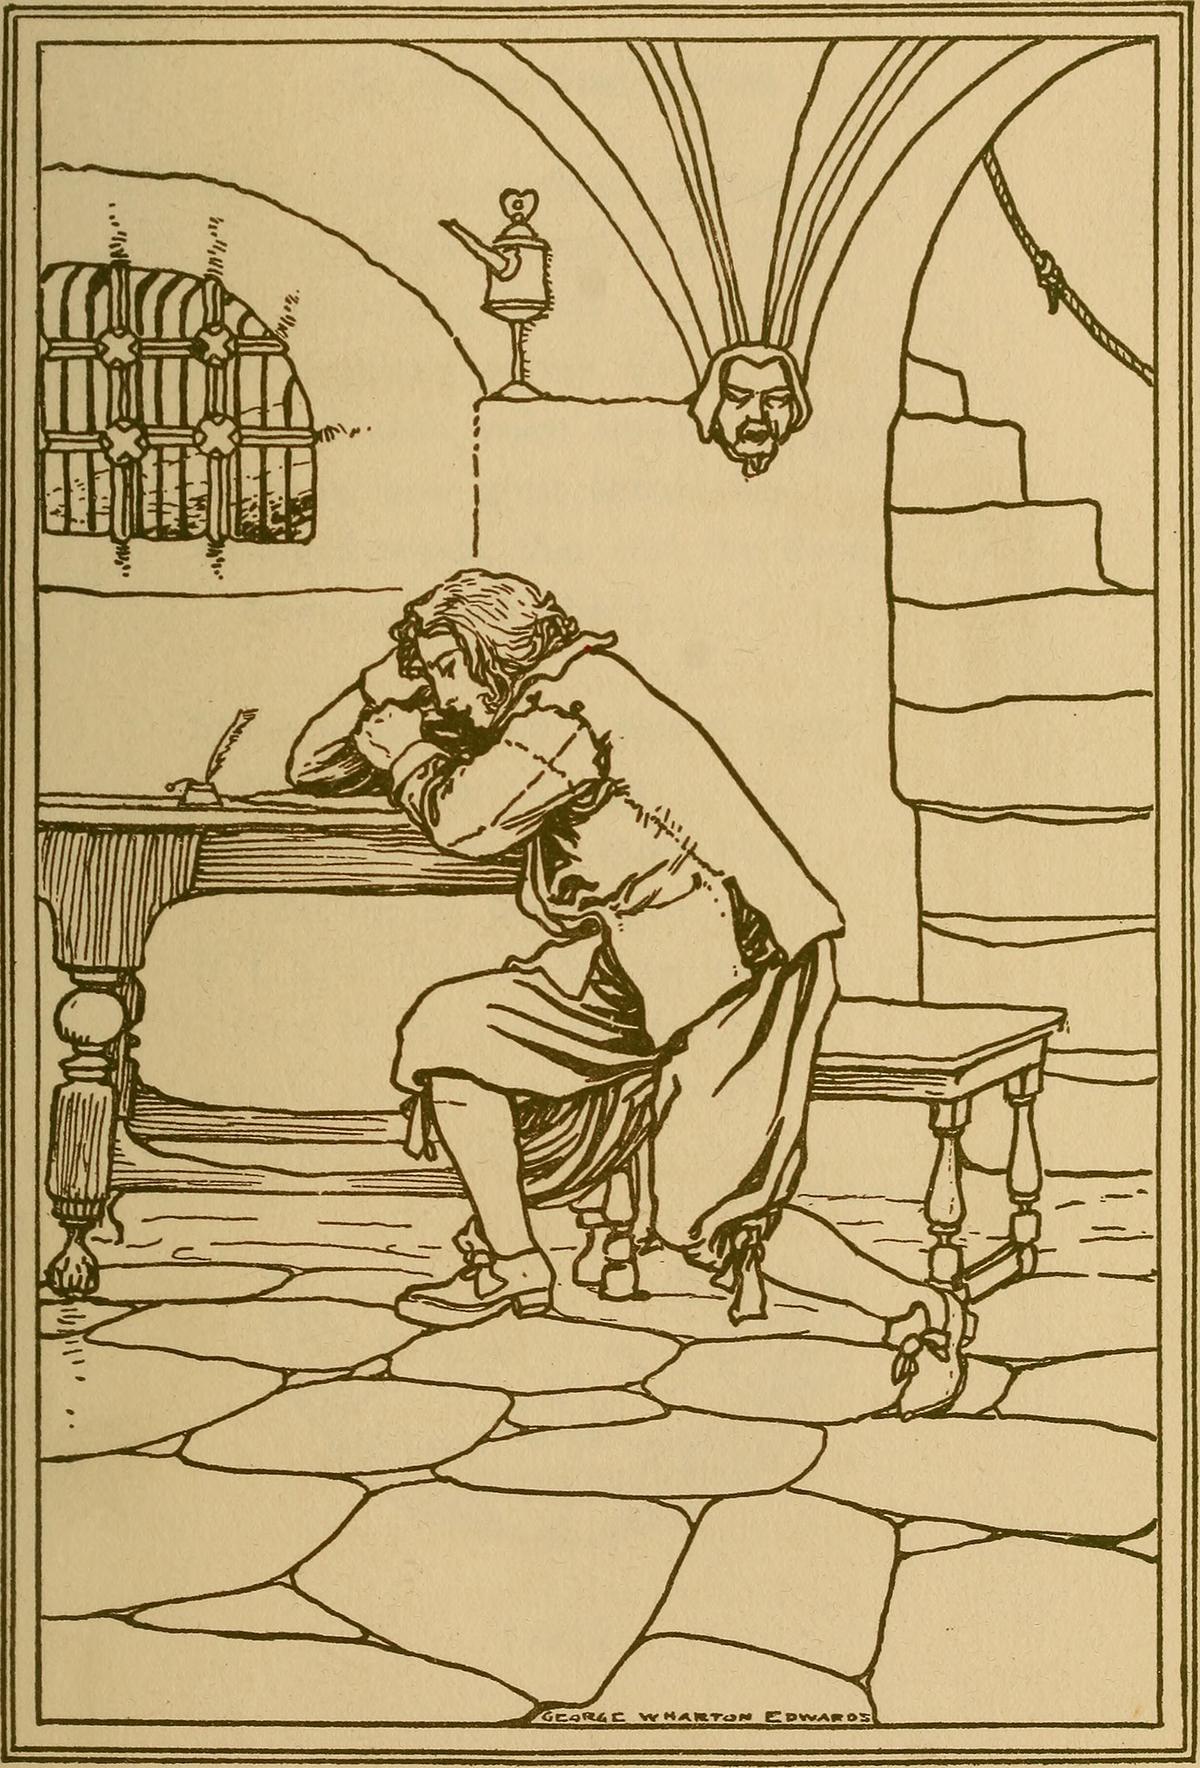 An illustrated plate of Richard Lovelace writing “To Althea From Prison” from “A Book of Old English Love Songs,” 1897, by Hamilton Wright Mabie with illustrations by George Wharton Edwards. Internet Archive. (Public Domain)